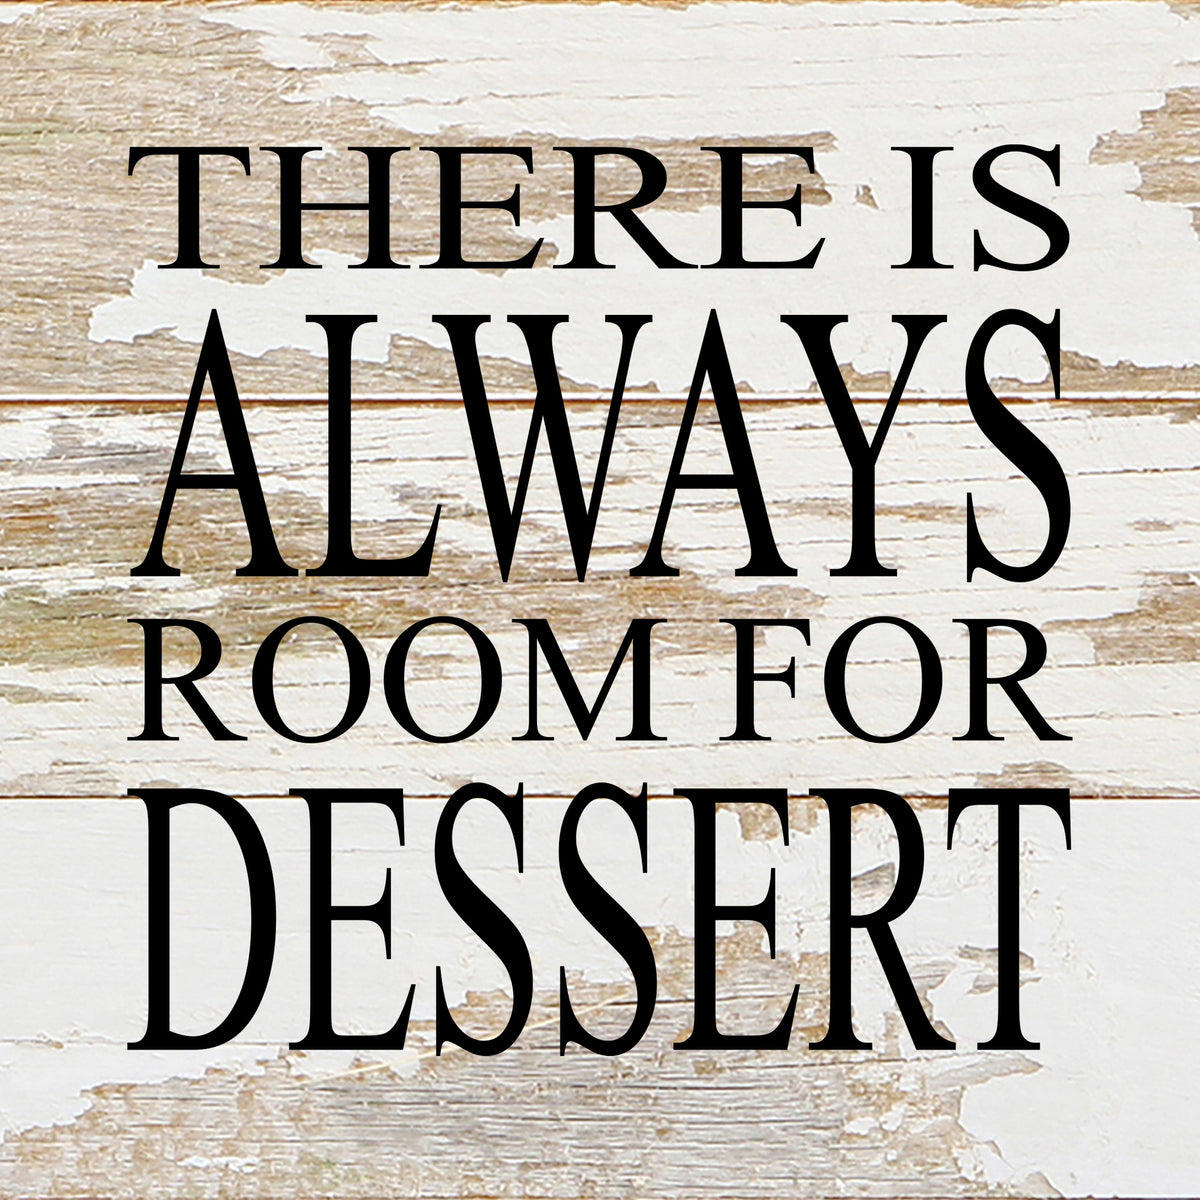 There is always room for dessert. / 6"x6" Reclaimed Wood Sign